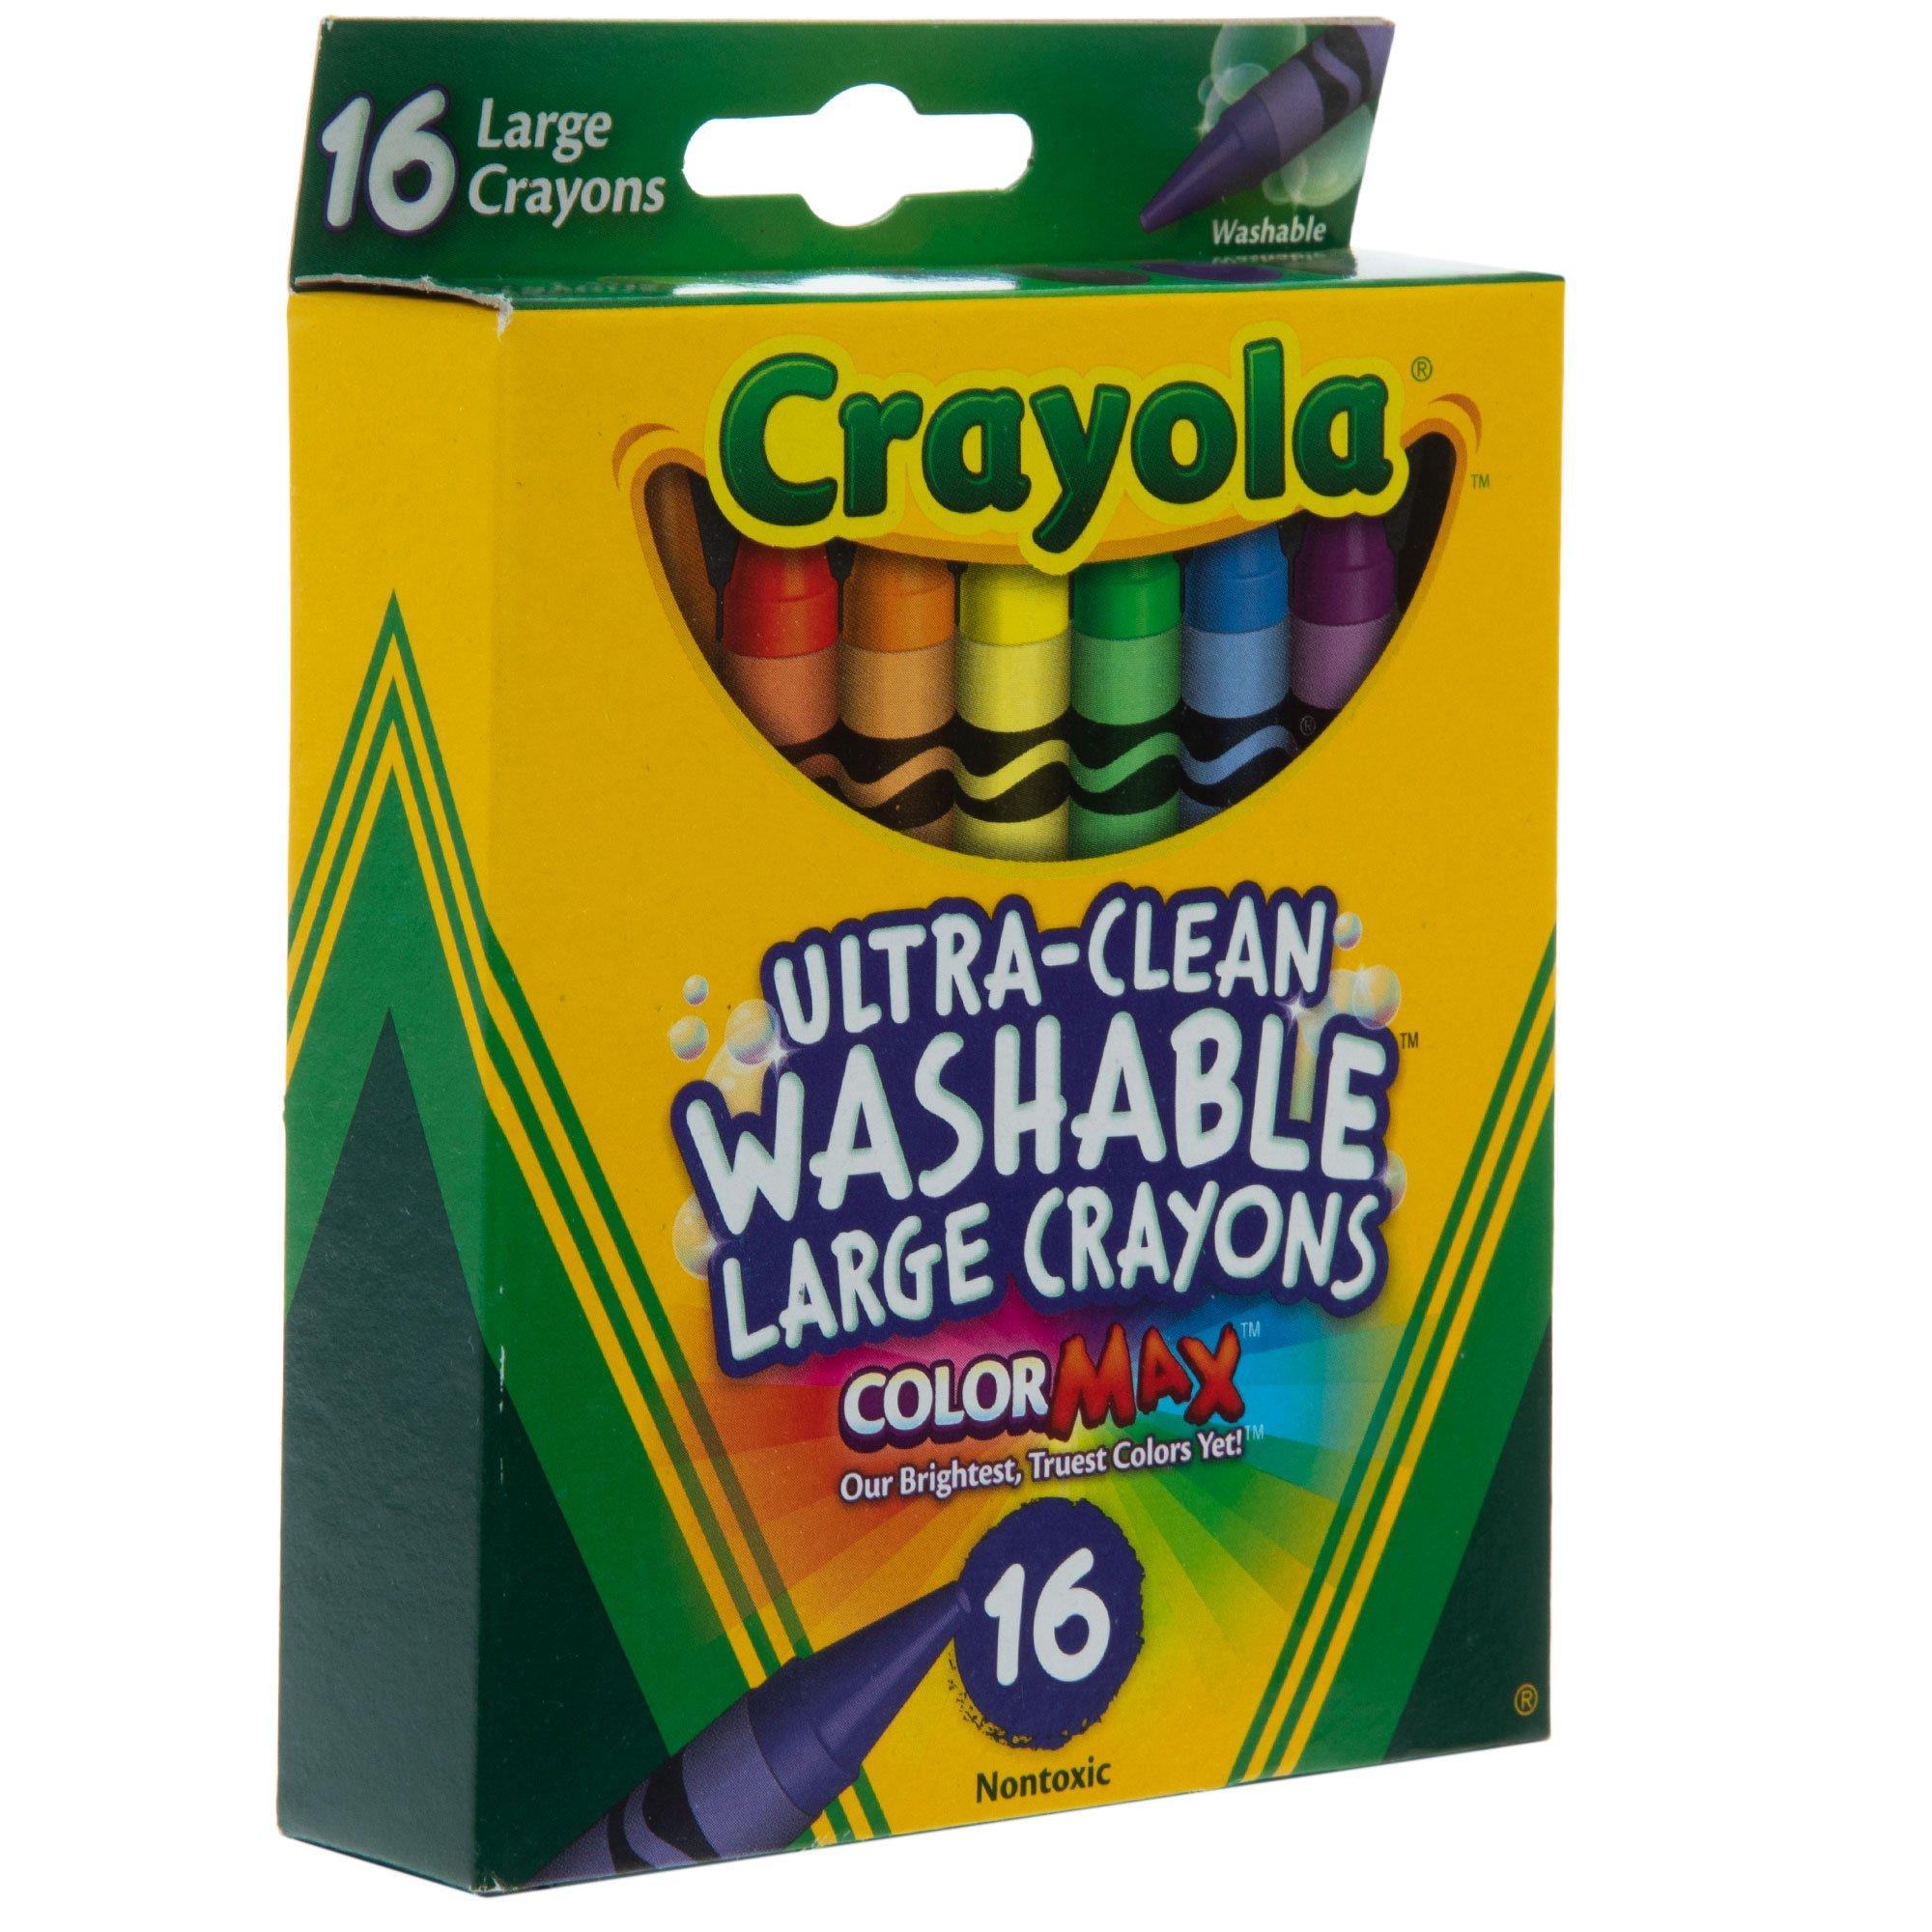 Crayola Ultra-Clean Washable Large Crayons - 16 Piece Set